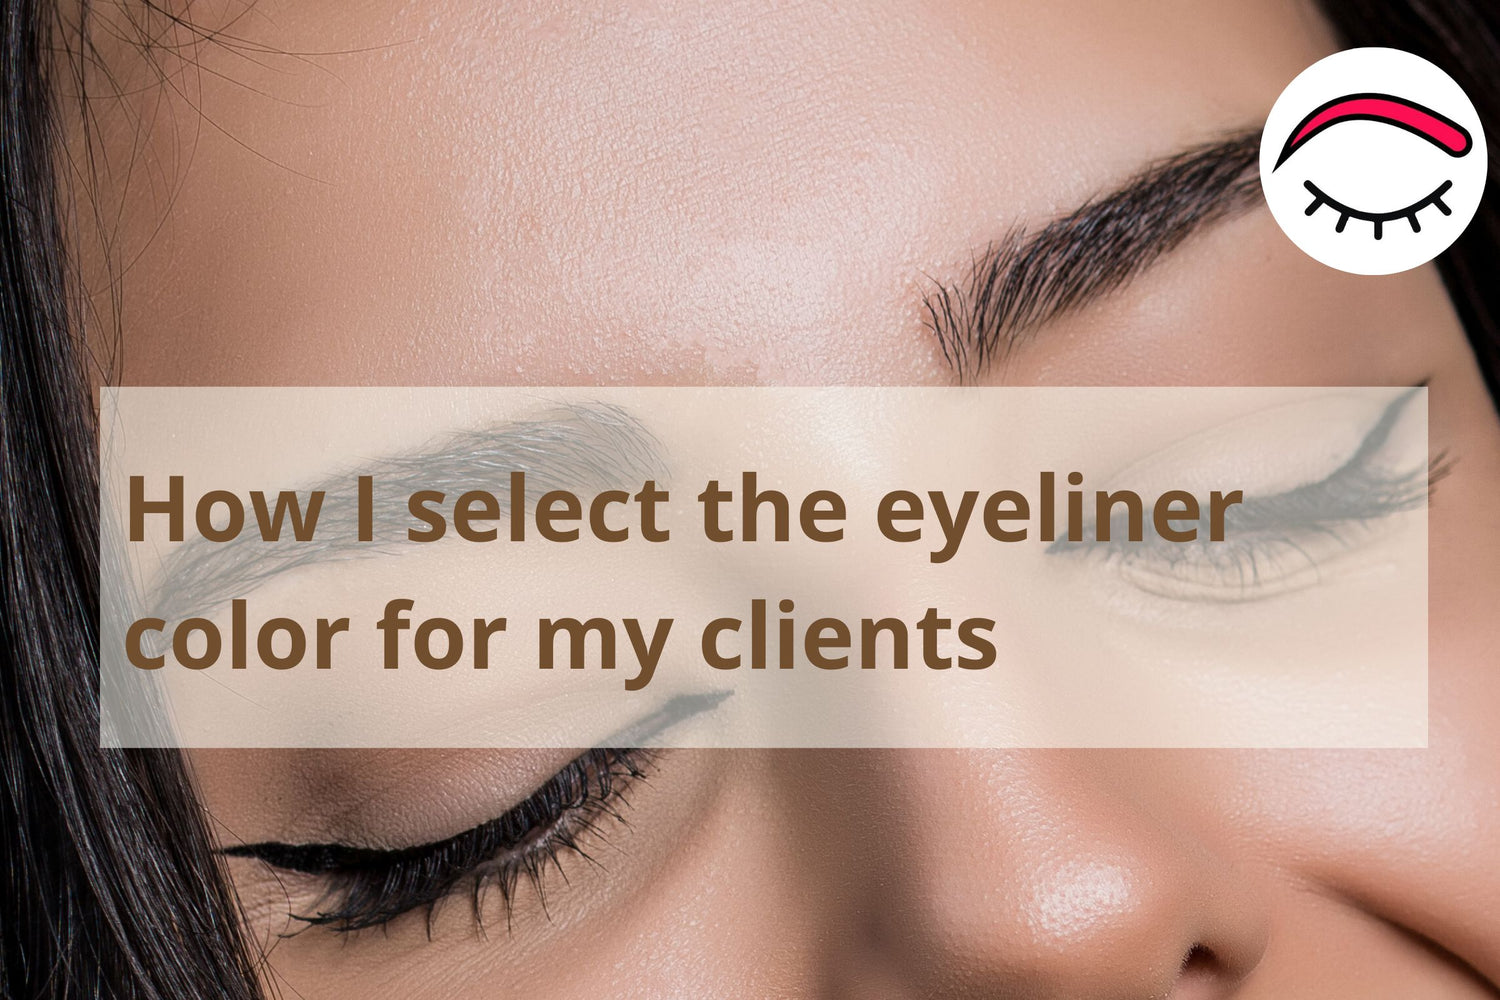 HOW I SELECT THE EYELINER COLOR FOR MY CLIENTS